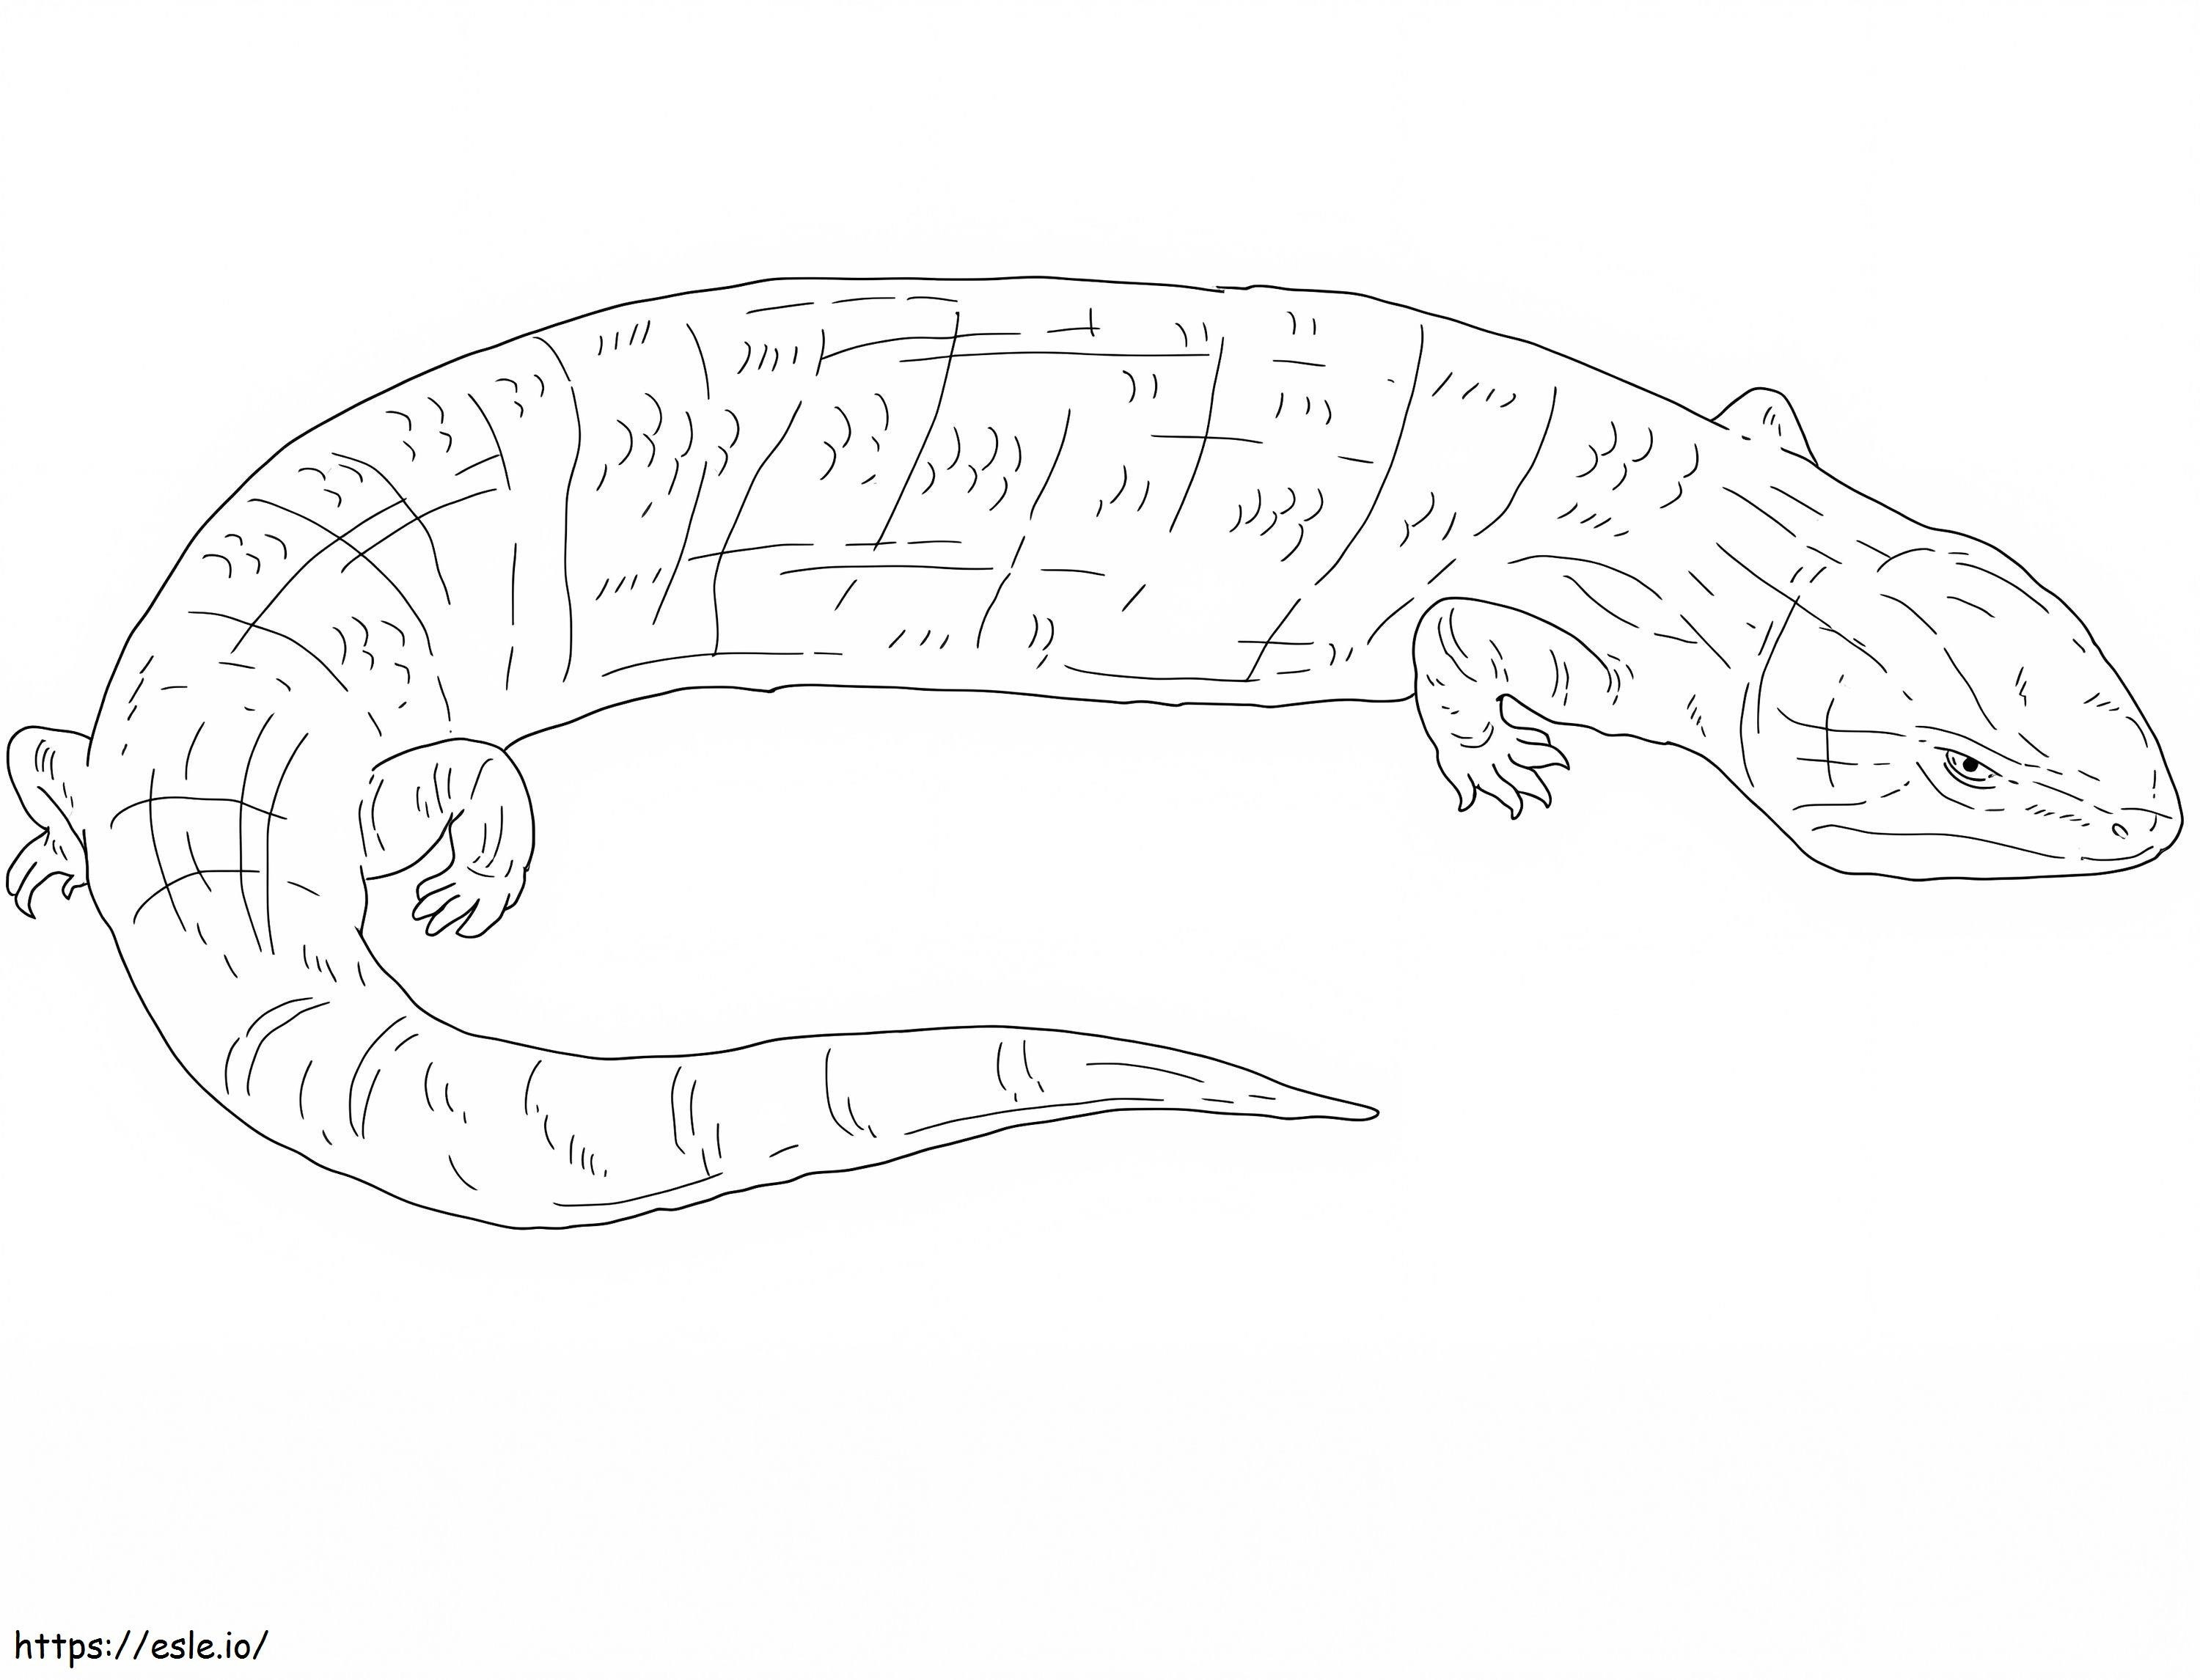 Eastern Blue Tongue Skink coloring page